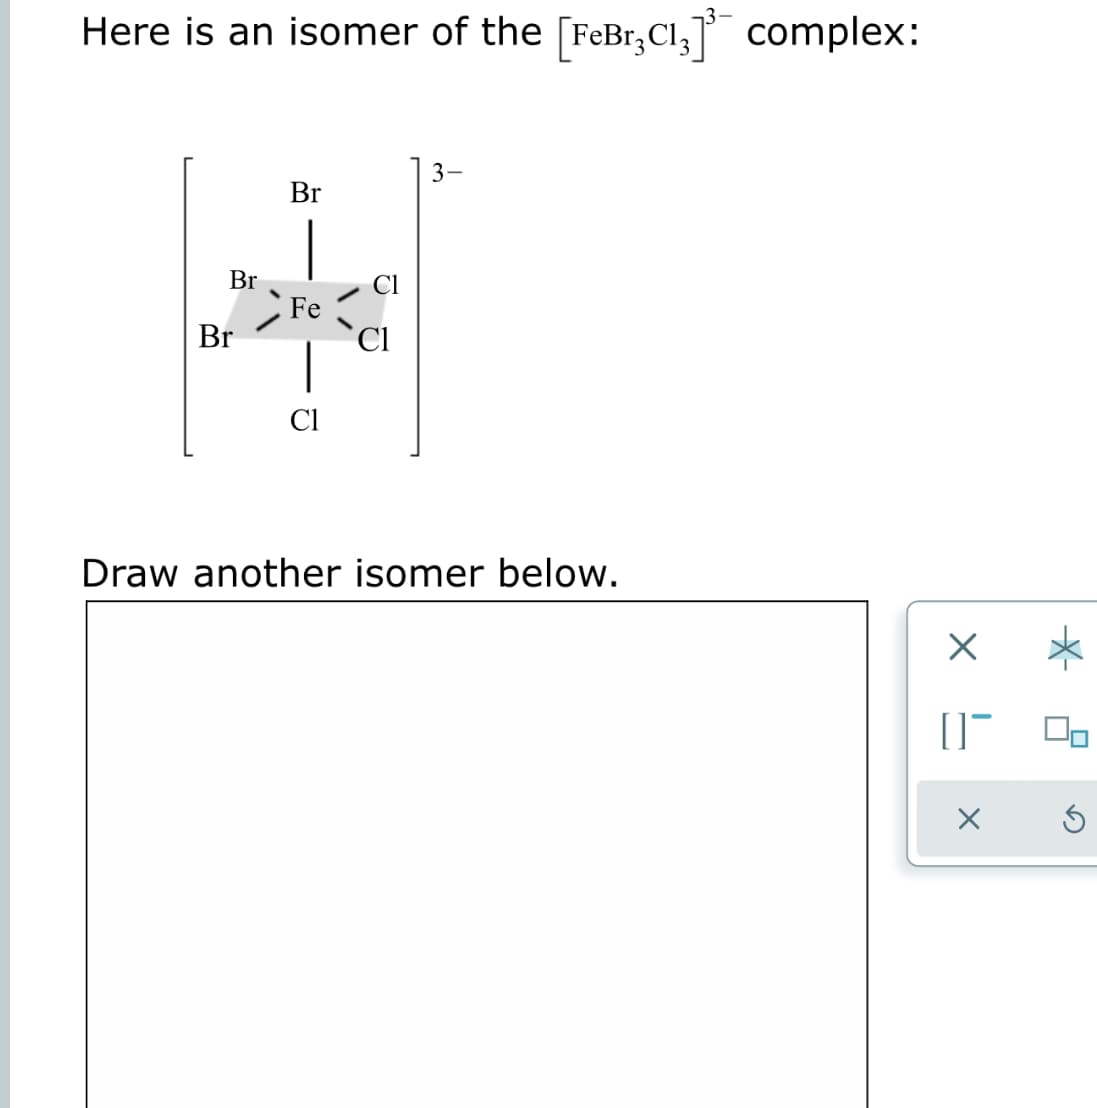 Here is an isomer of the [FeBr,CI, complex:
3-
Br
Br
Fe
Br
Cl
Cl
Draw another isomer below.
